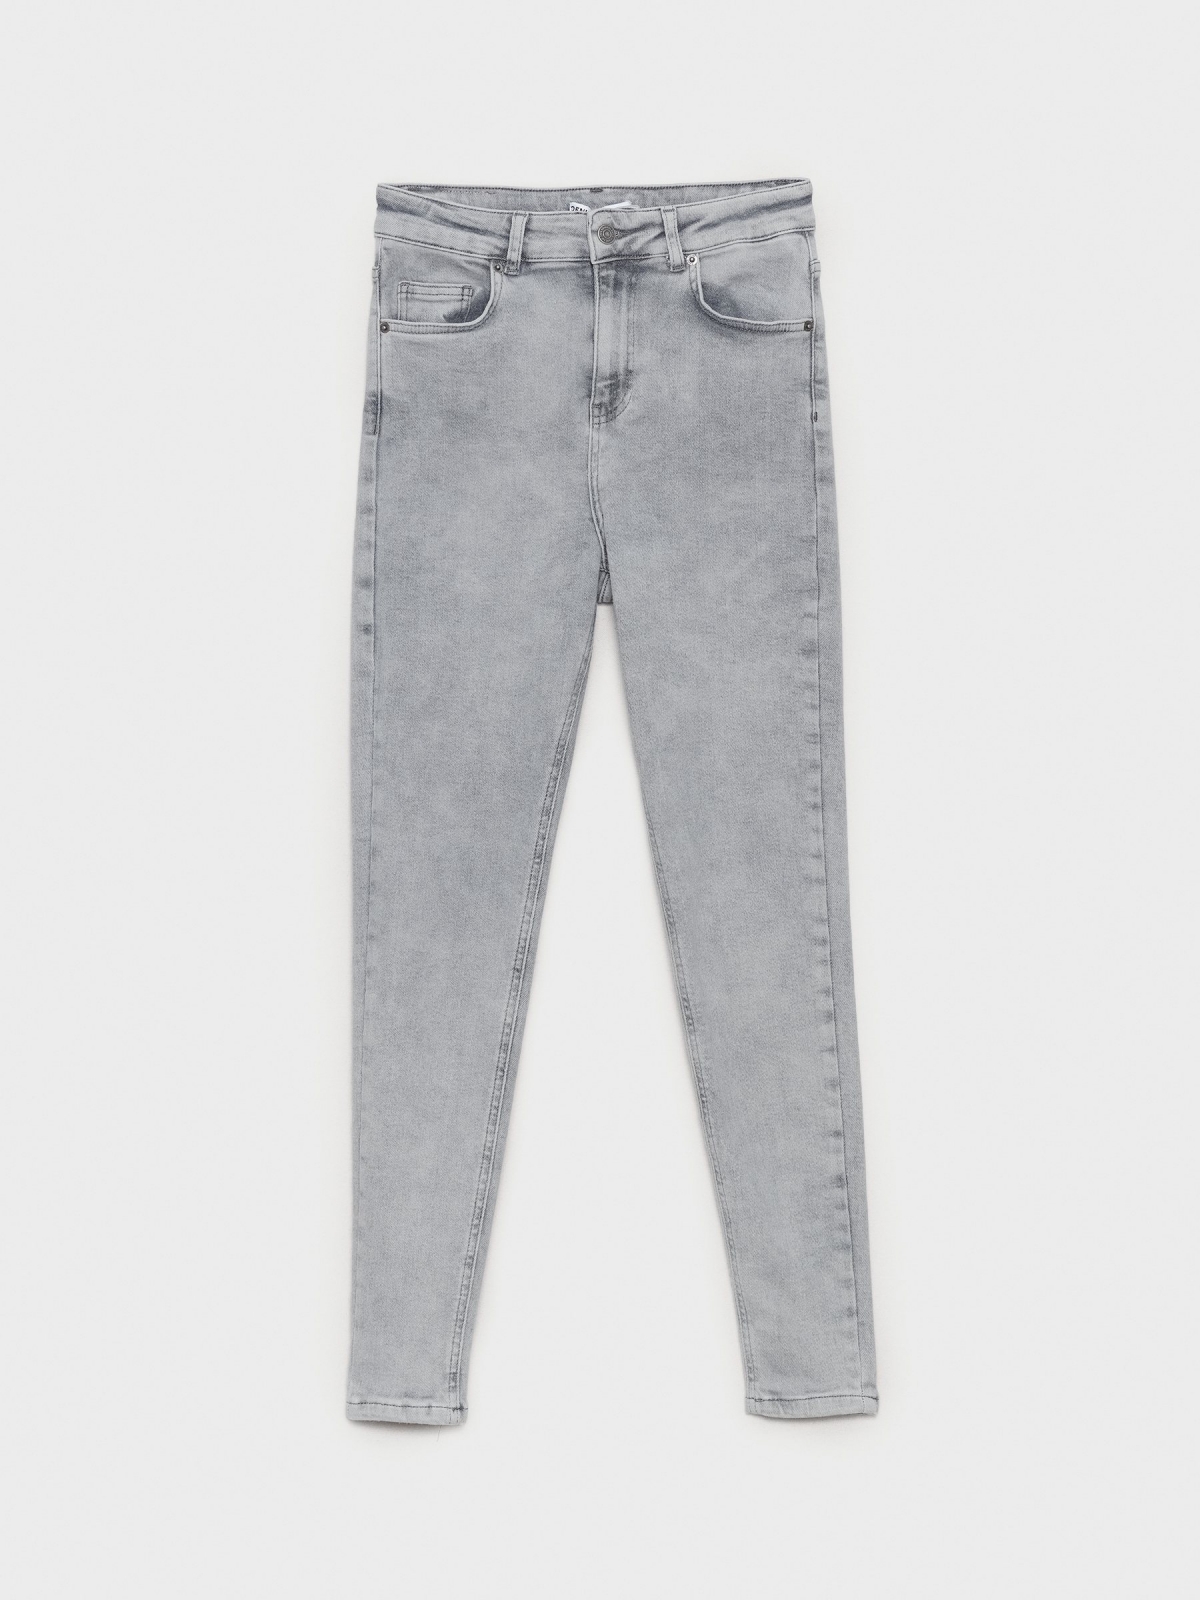  Washed gray high waisted skinny jeans light grey